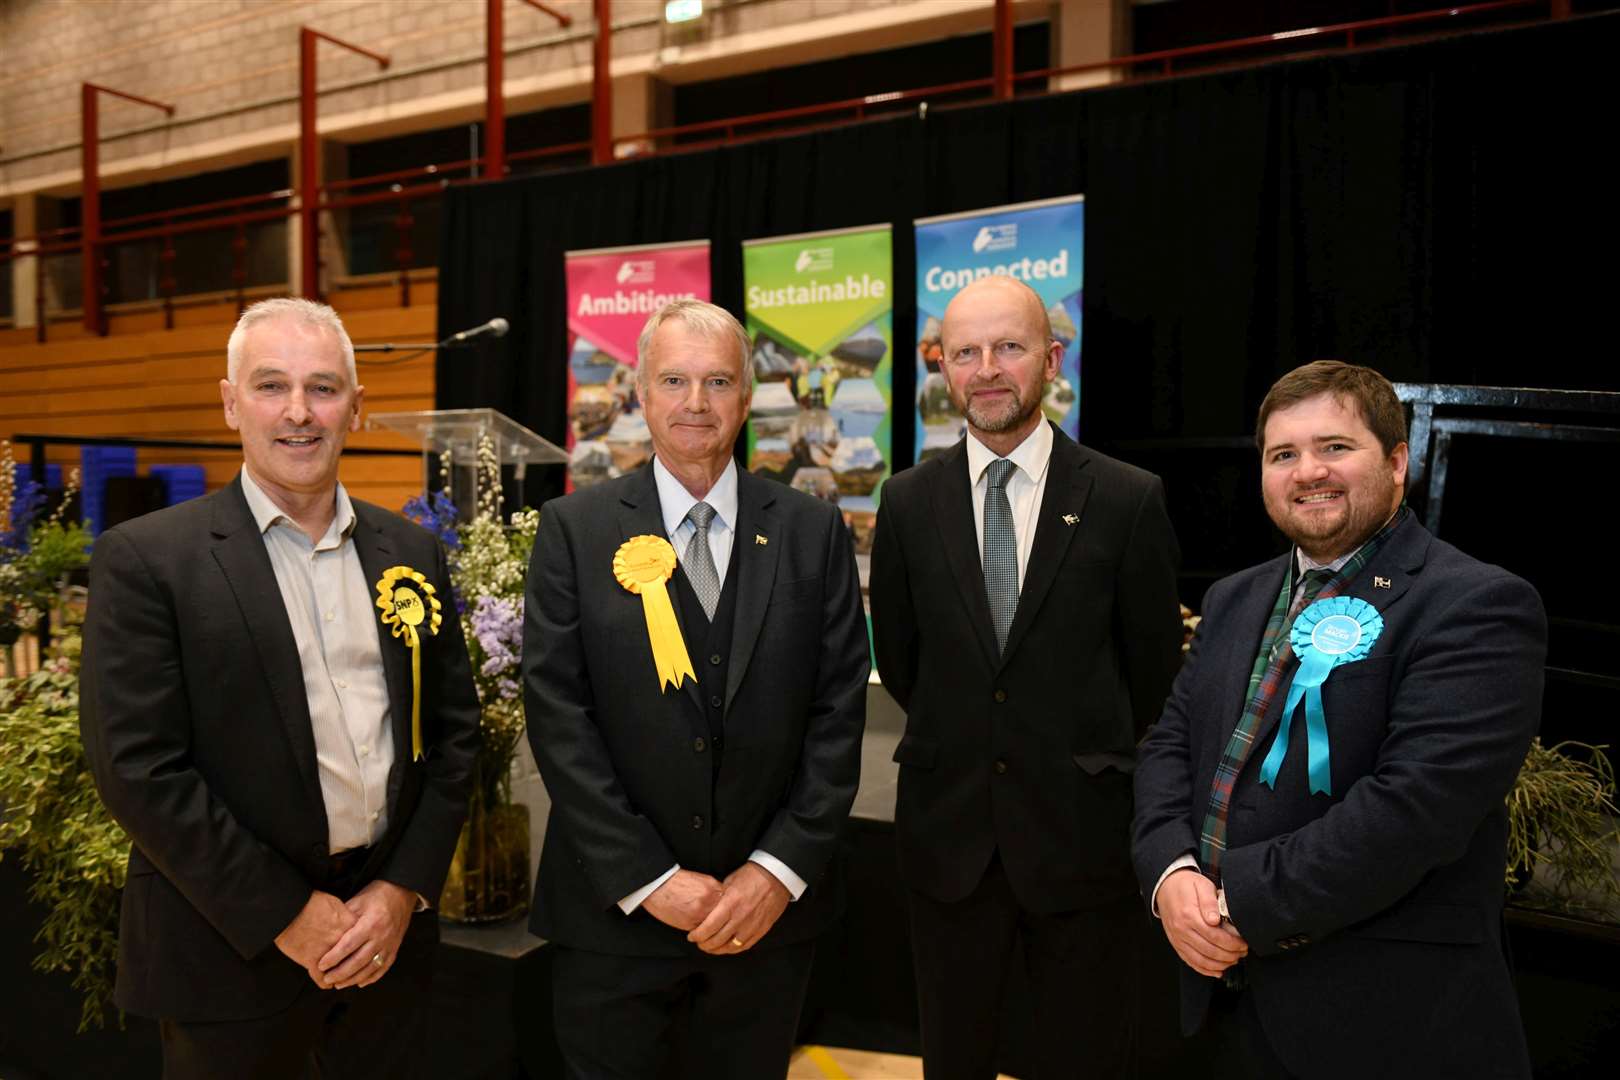 Councillors by Ward: 02 Thurso and Northwest Caithness: From left, Karl Rosie (Scottish National Party (SNP), Ron Gunn (Scottish Liberal Democrats), Matthew Reiss (Independent) and Struan Mackie (Scottish Conservative and.Unionist). Picture: Callum Mackay